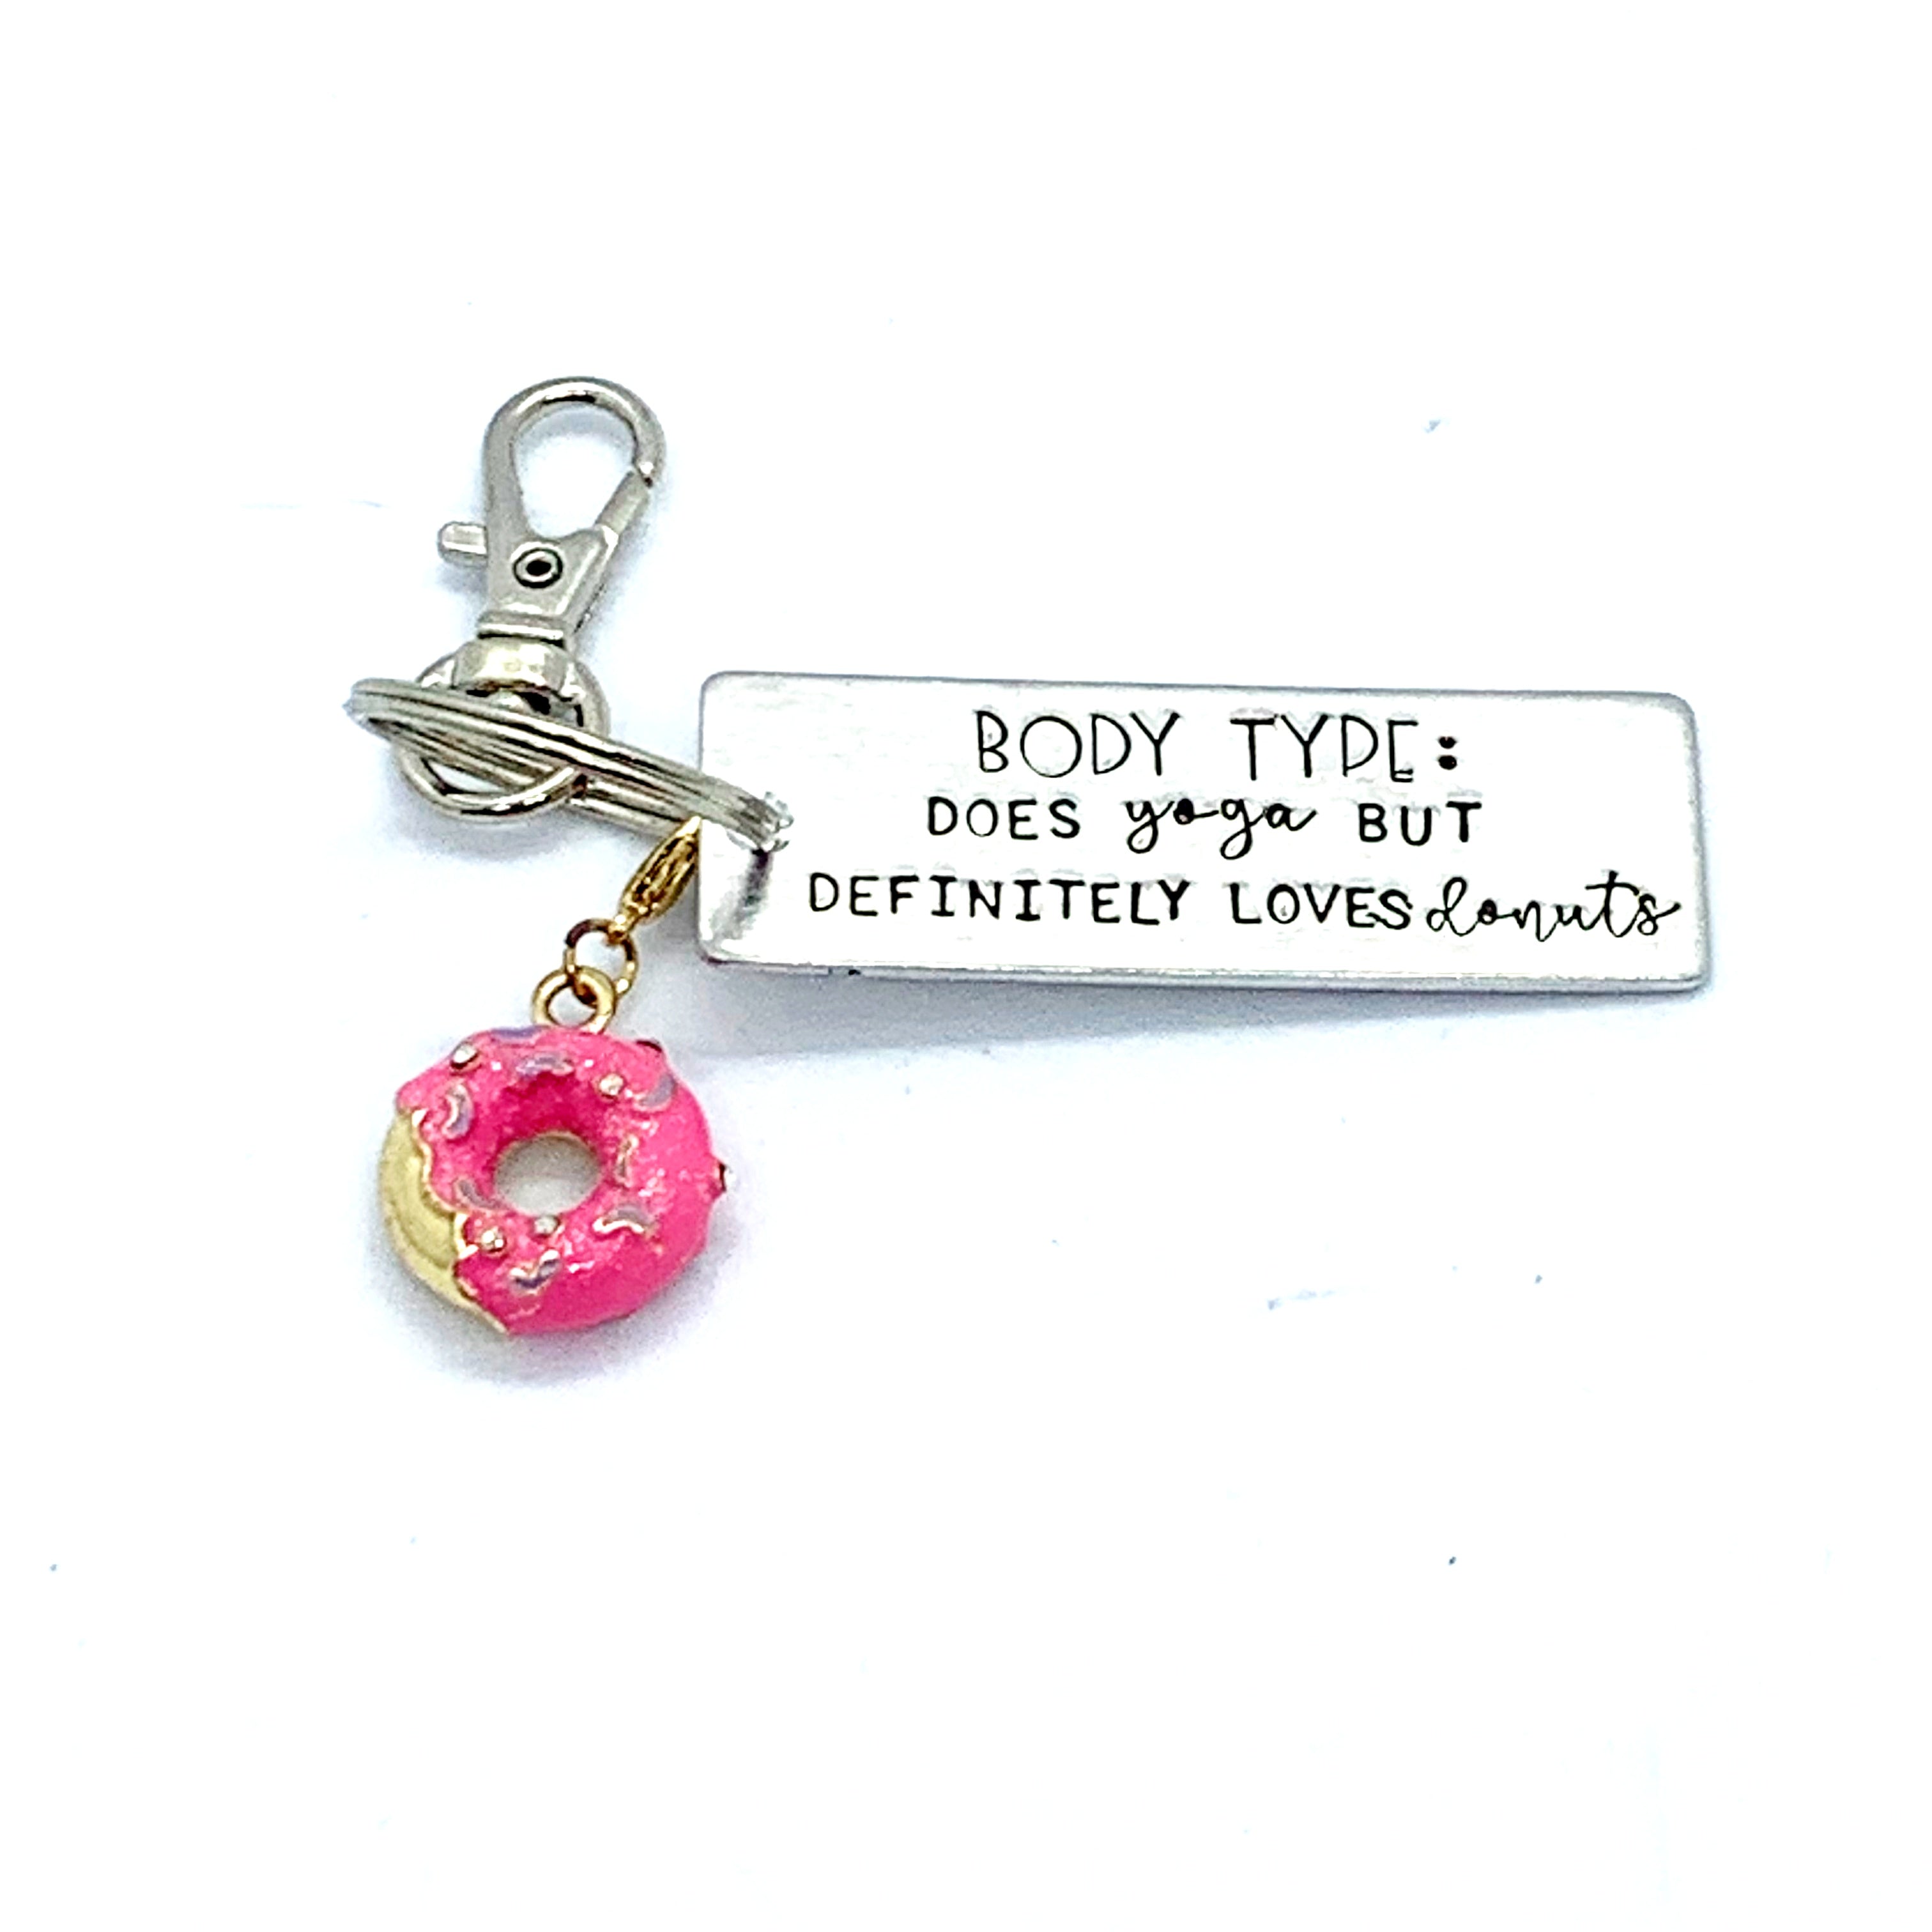 Key Chain - Large Rectangle w/ Specialty Tassel - Body Type: Does Yoga But Definitely Loves Donuts